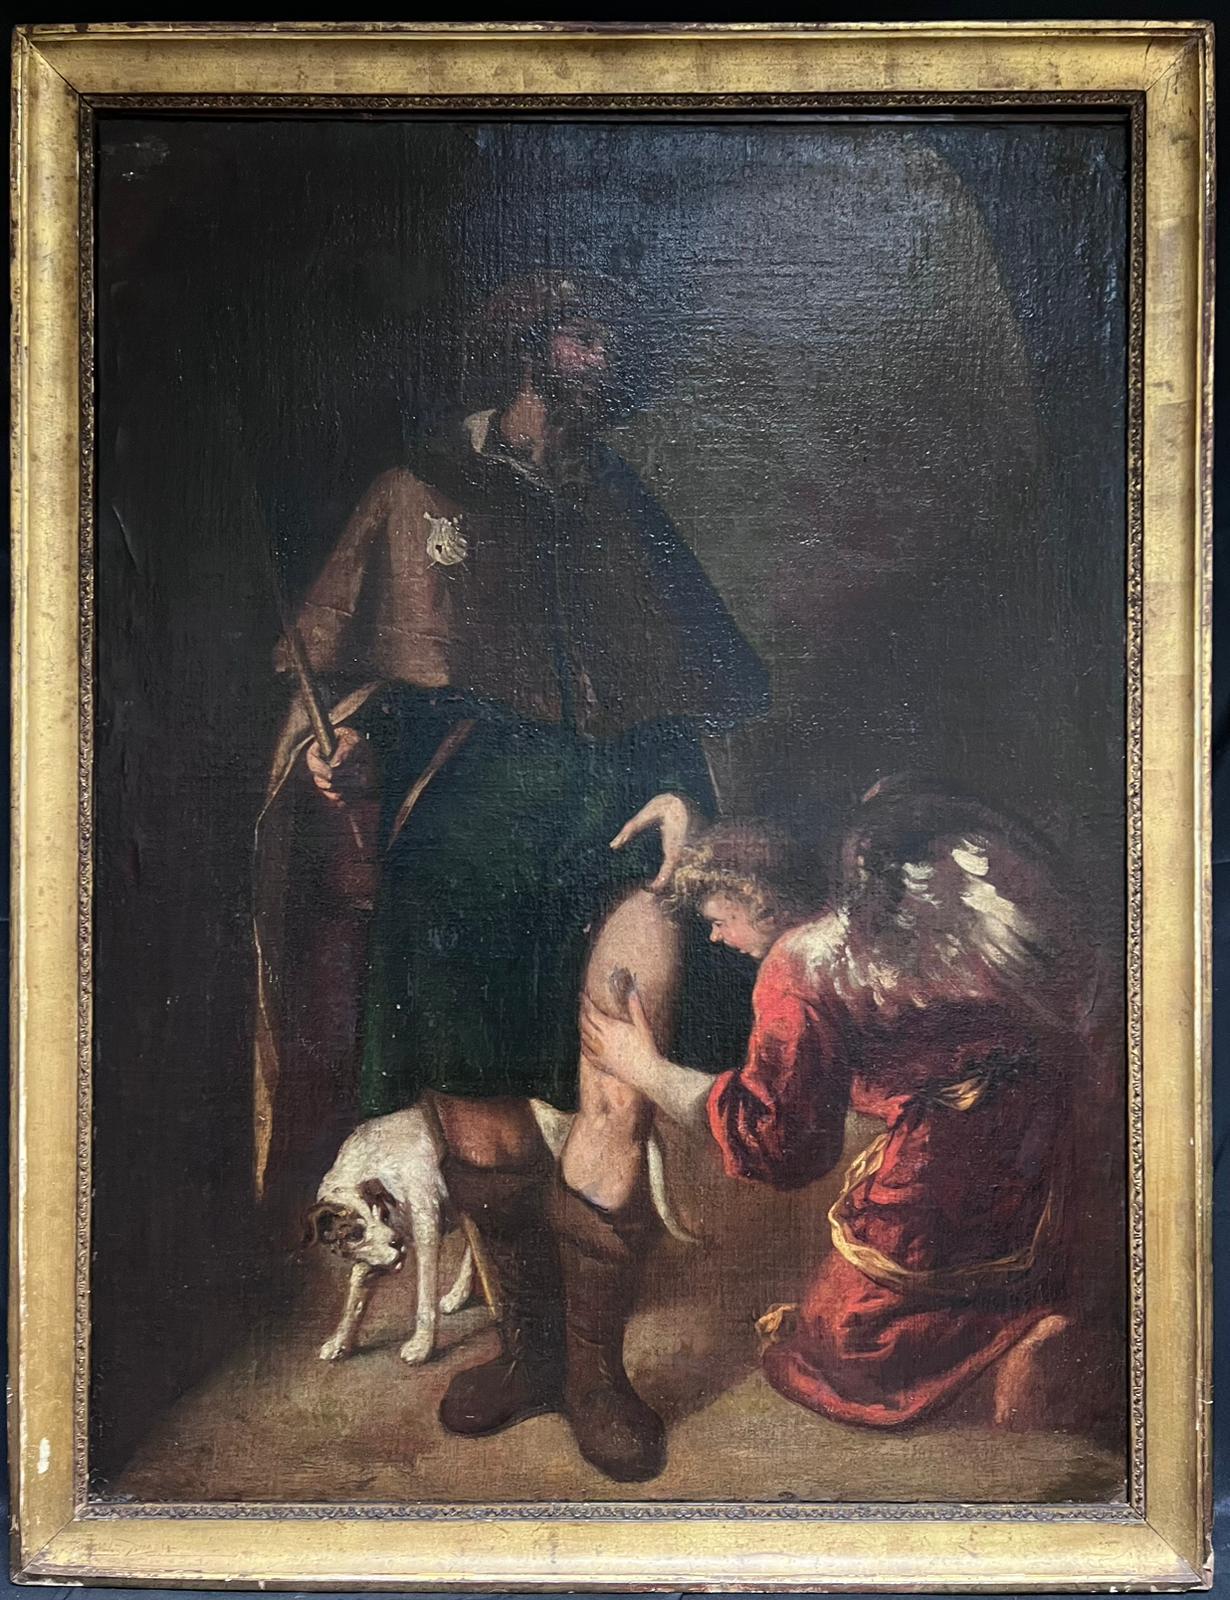 The Pilgrim and Angel
Spanish School, 17th Century
oil on canvas, gilt framed
framed: 48 x 37 inches
canvas: 43 x 32 inches
provenance: private collection, Barcelona, Spain
condition: very good and sound condition for its age; there are a few scuffs